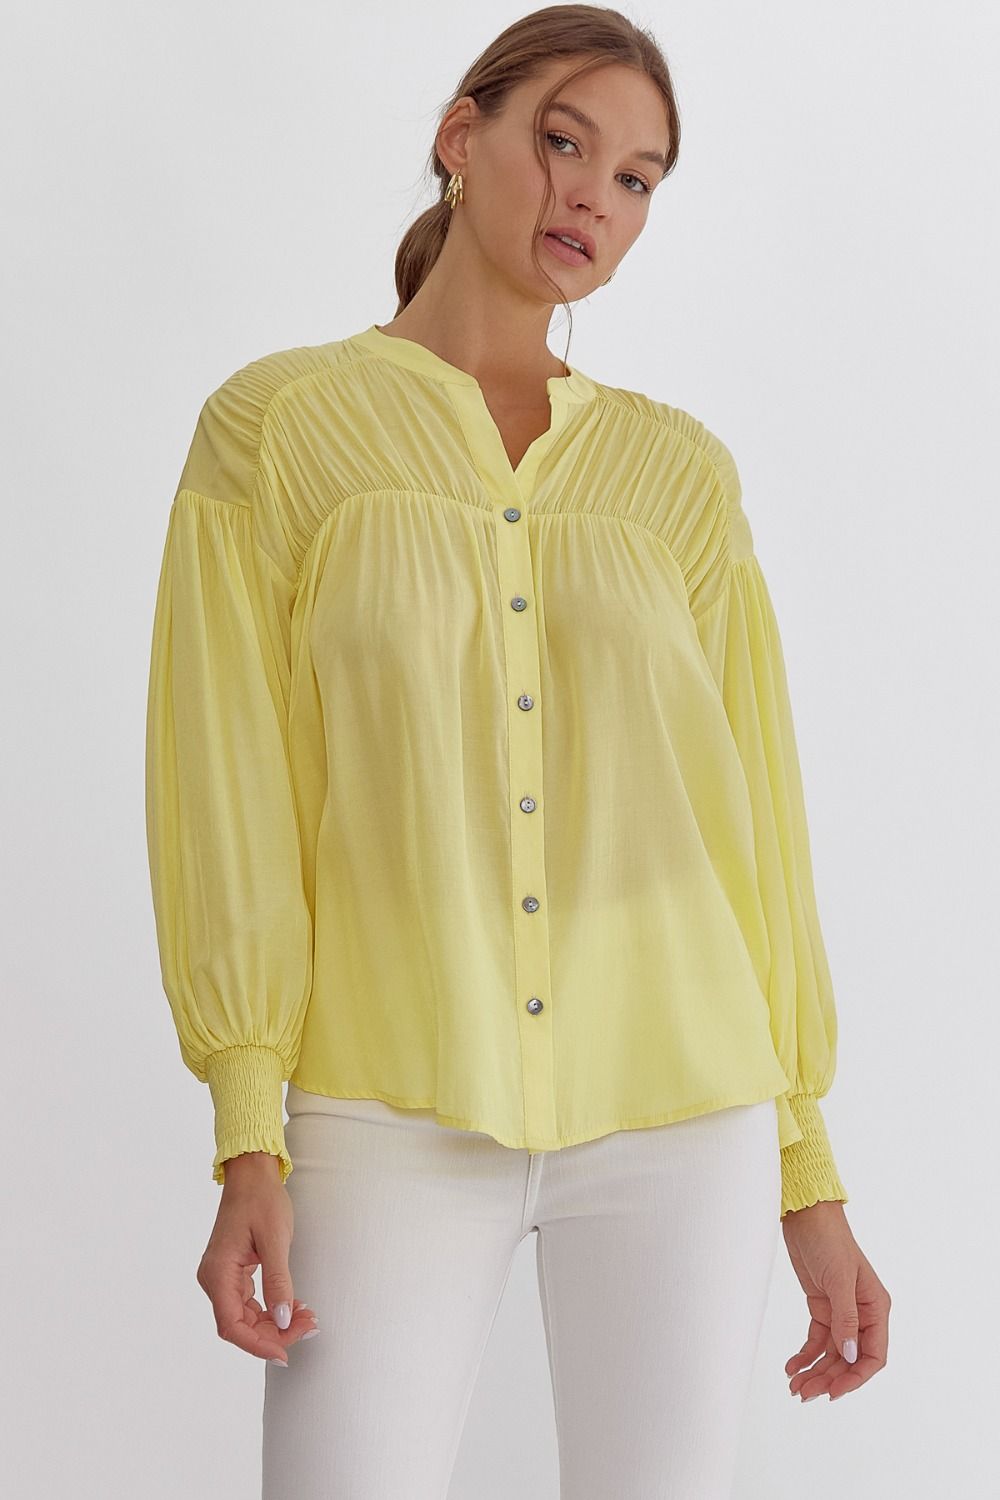 ENTRO INC Women's Top LEMONADE / S V-Neck Button Up Ls Crinkle Sleeve Top || David's Clothing T21942